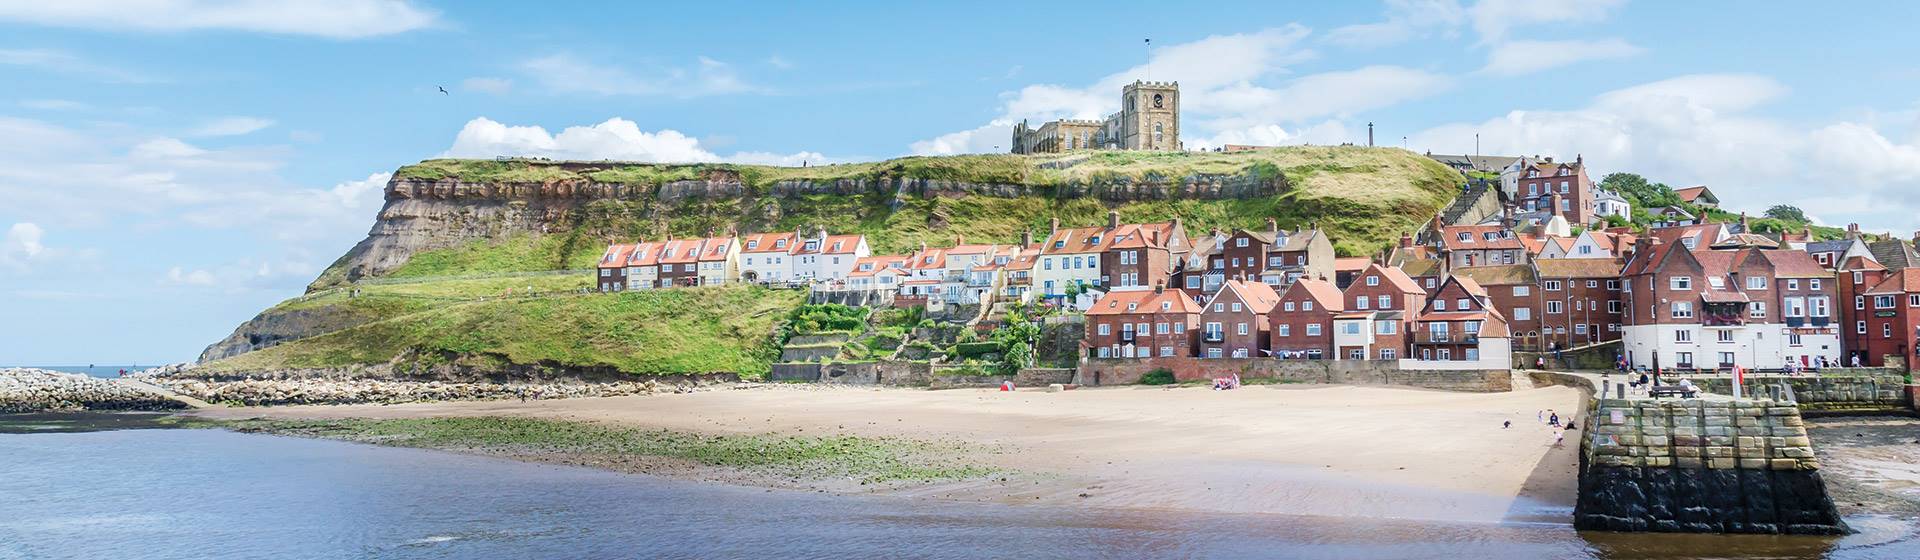 Bank Holiday in Whitby